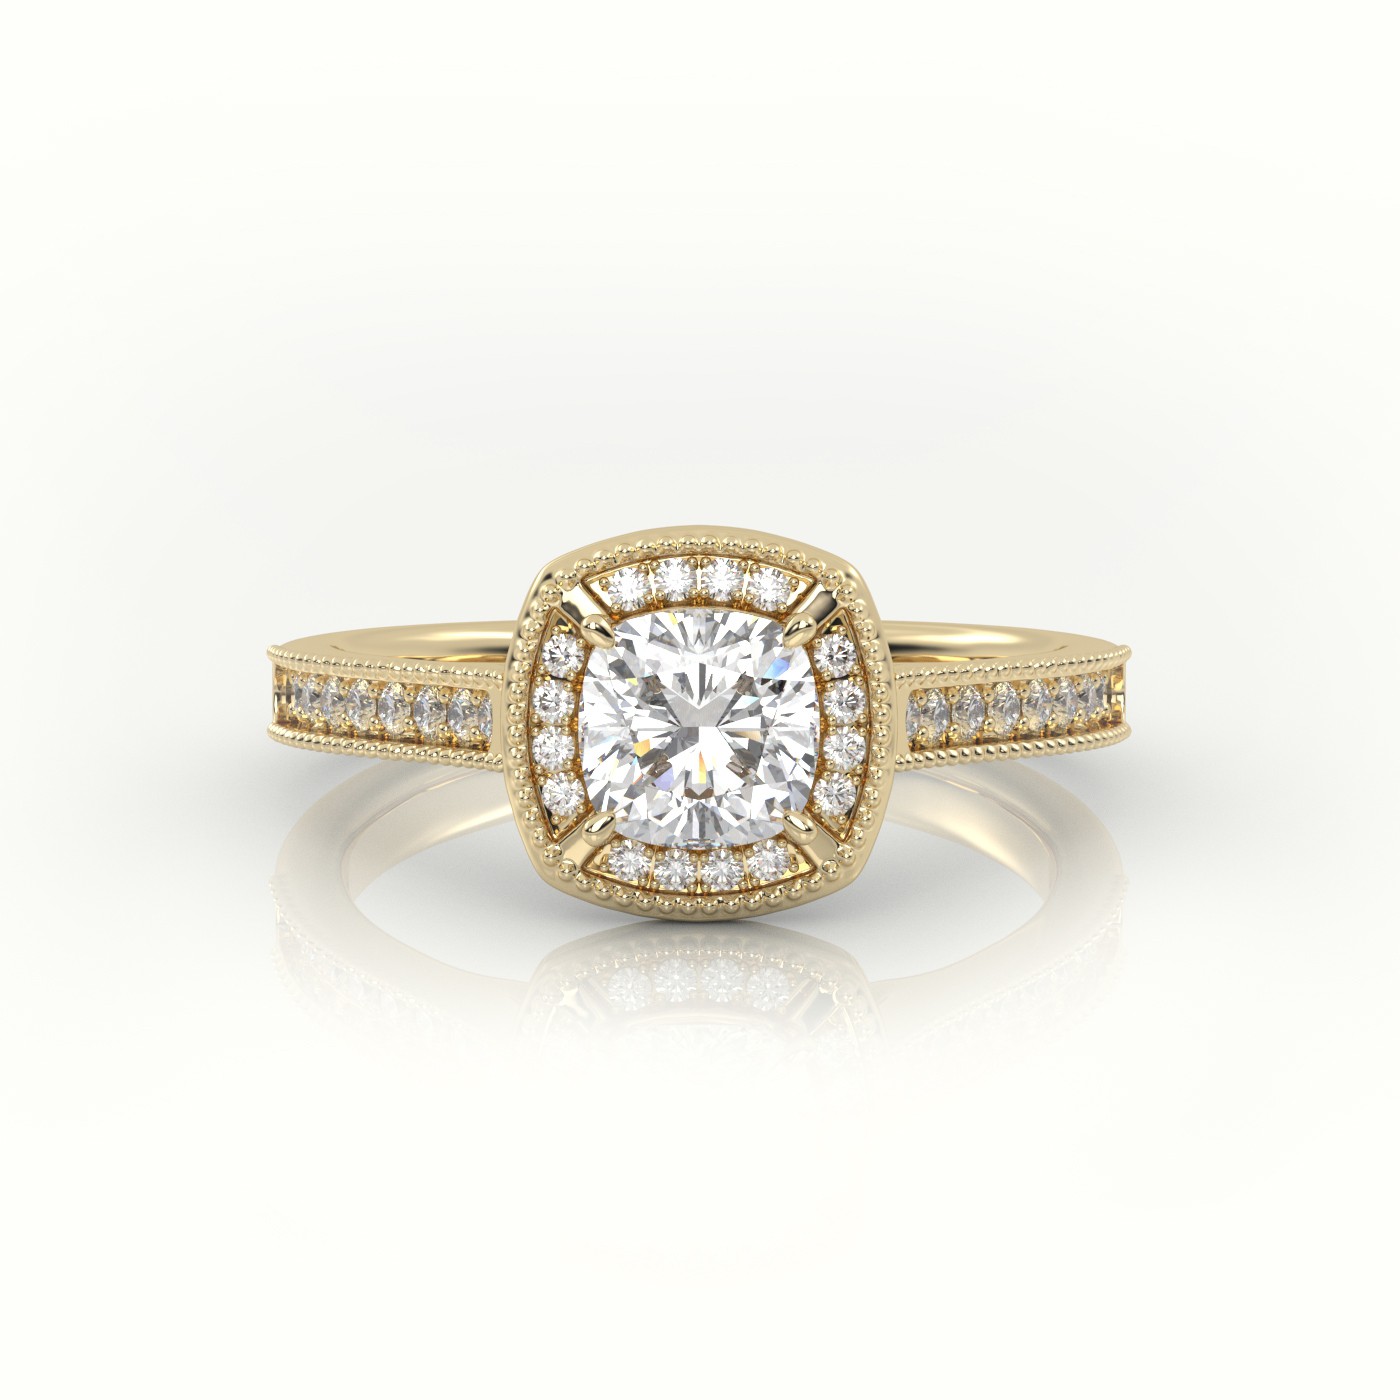 18K YELLOW GOLD ROUND-CUT DIAMOND HALO CHANNEL SETTING ENGAGEMENT RING